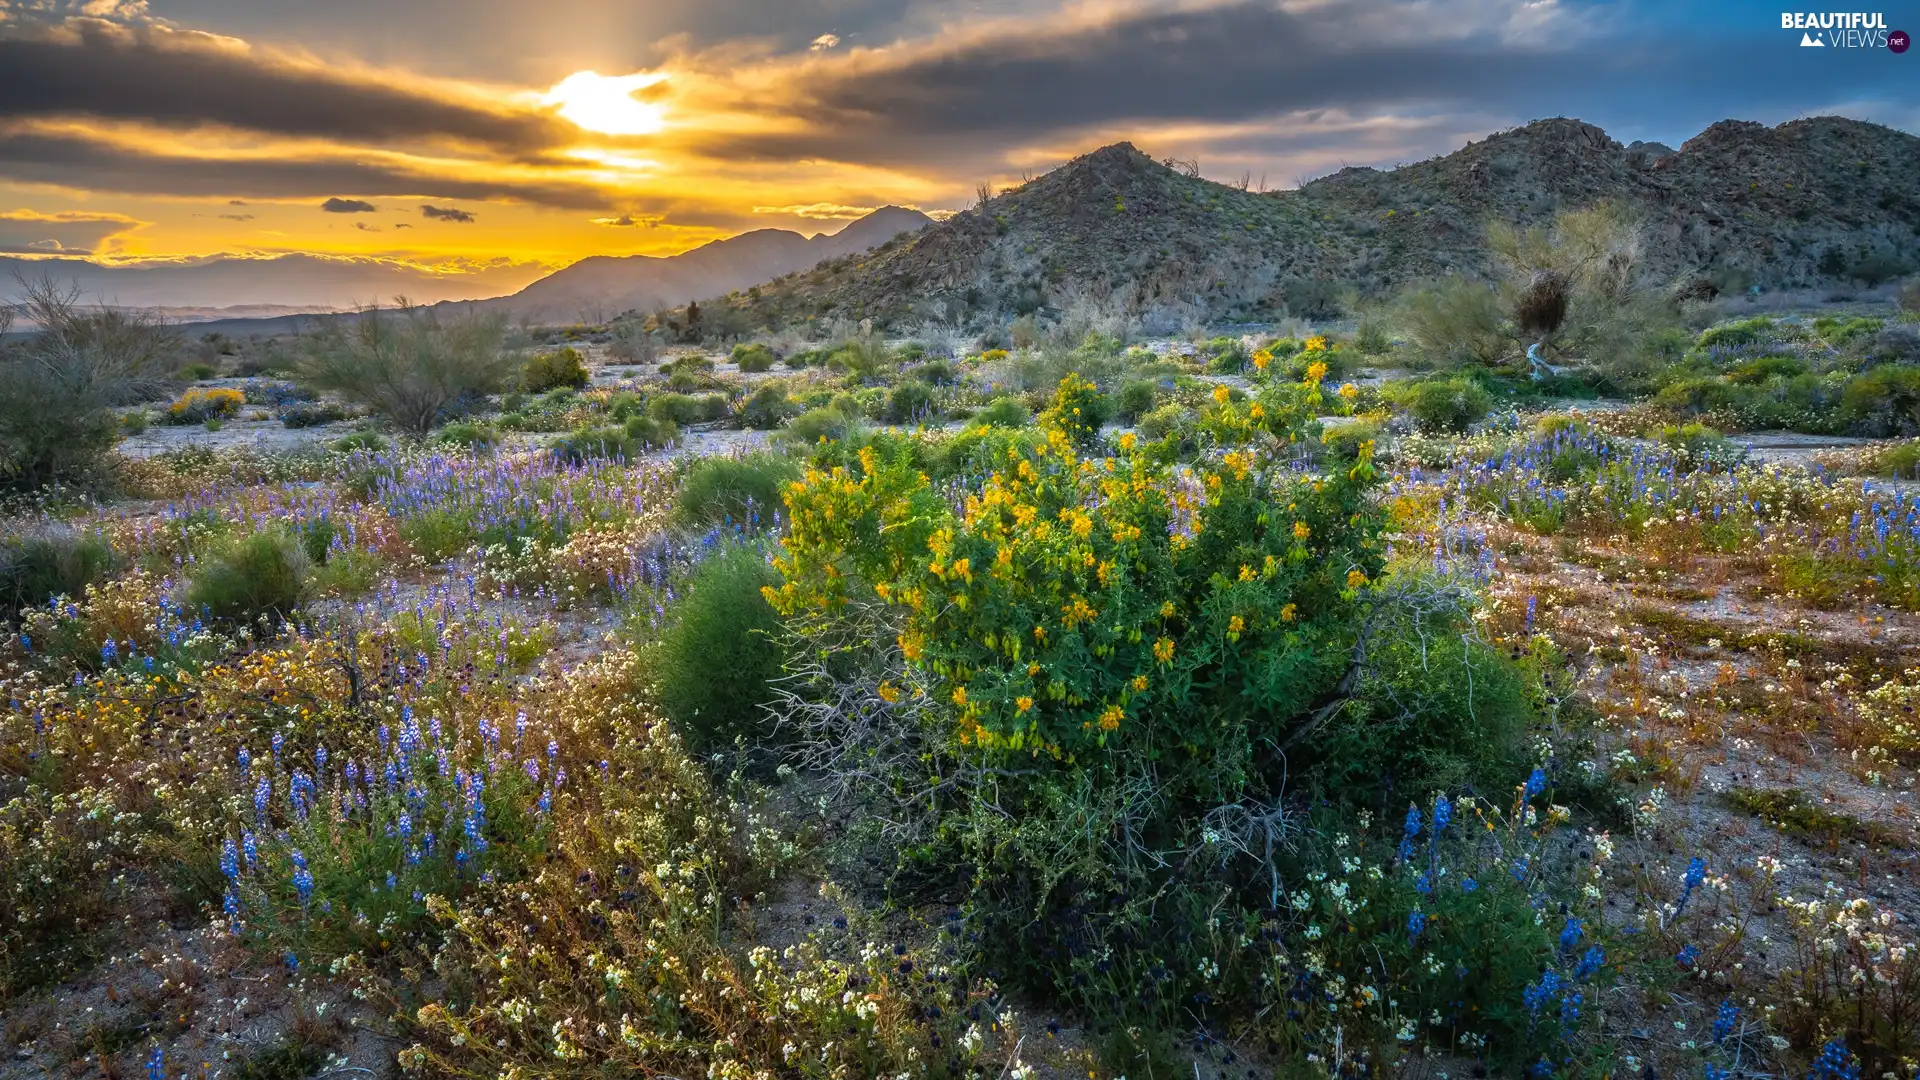 Flowers, The Hills, Great Sunsets, clouds, VEGETATION, Meadow